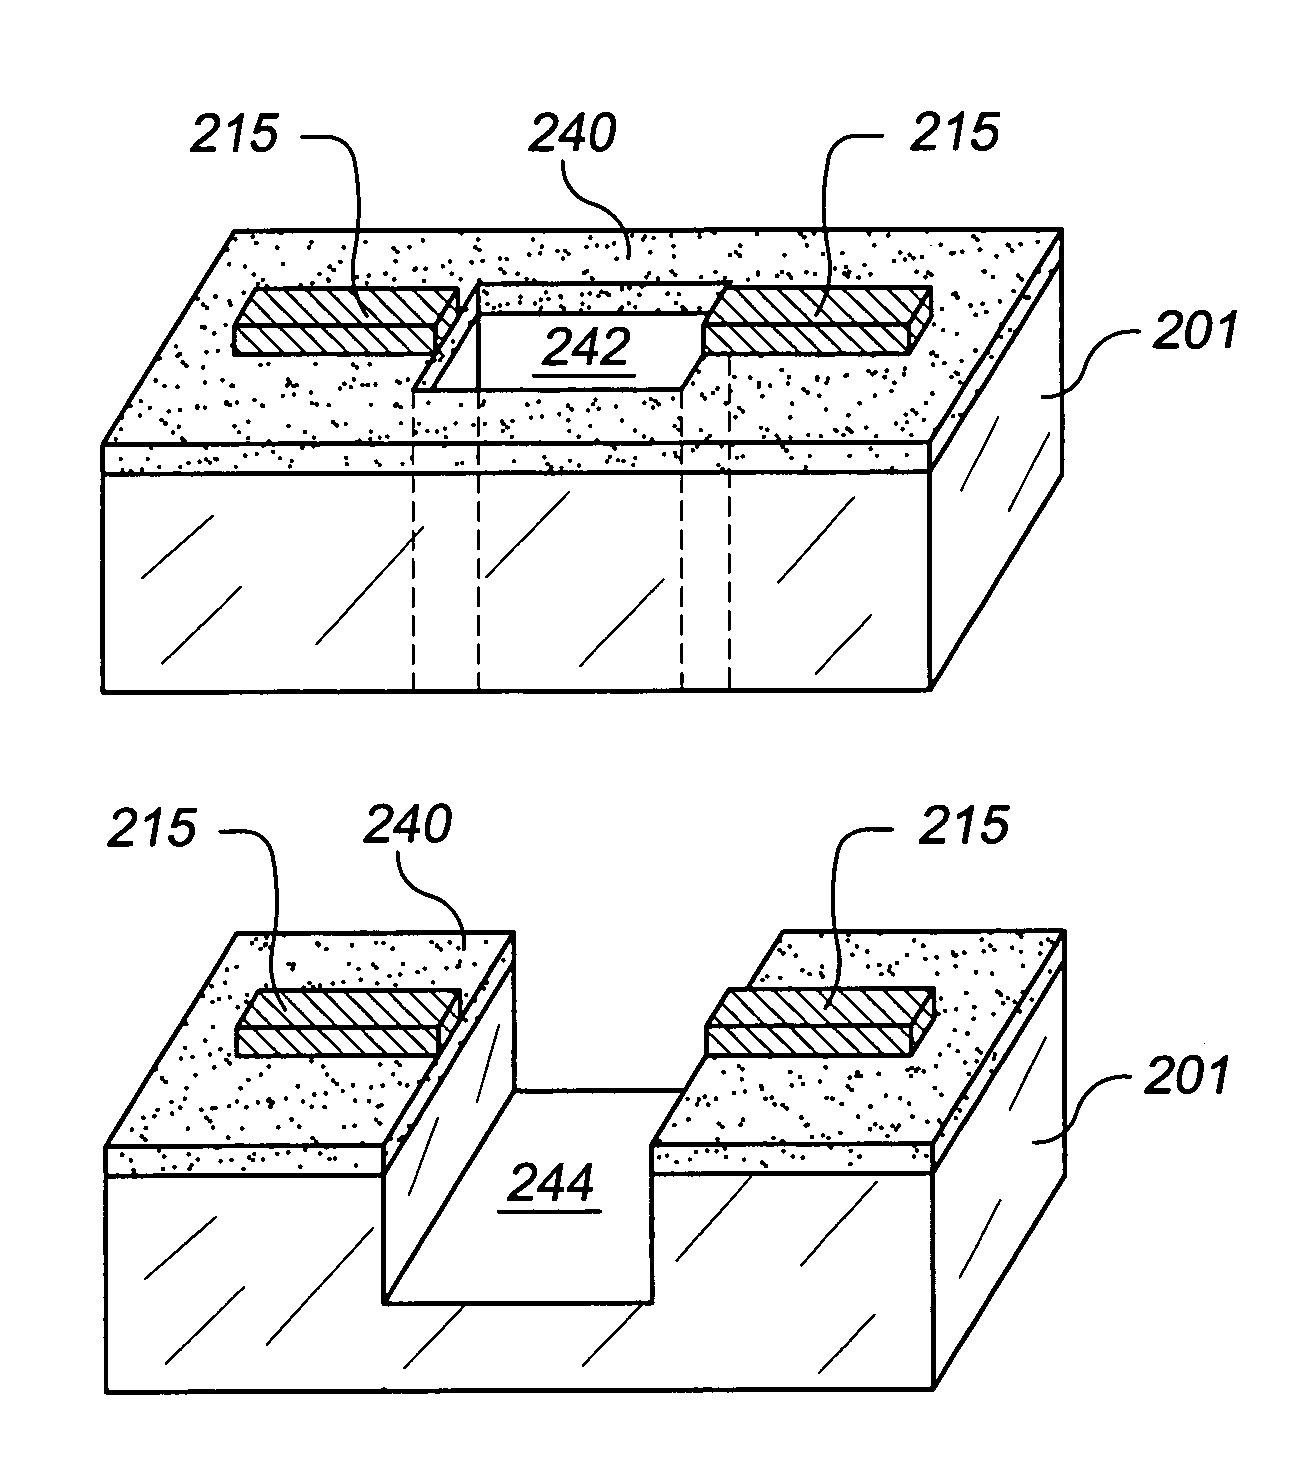 Controlled fabrication of gaps in electrically conducting structures